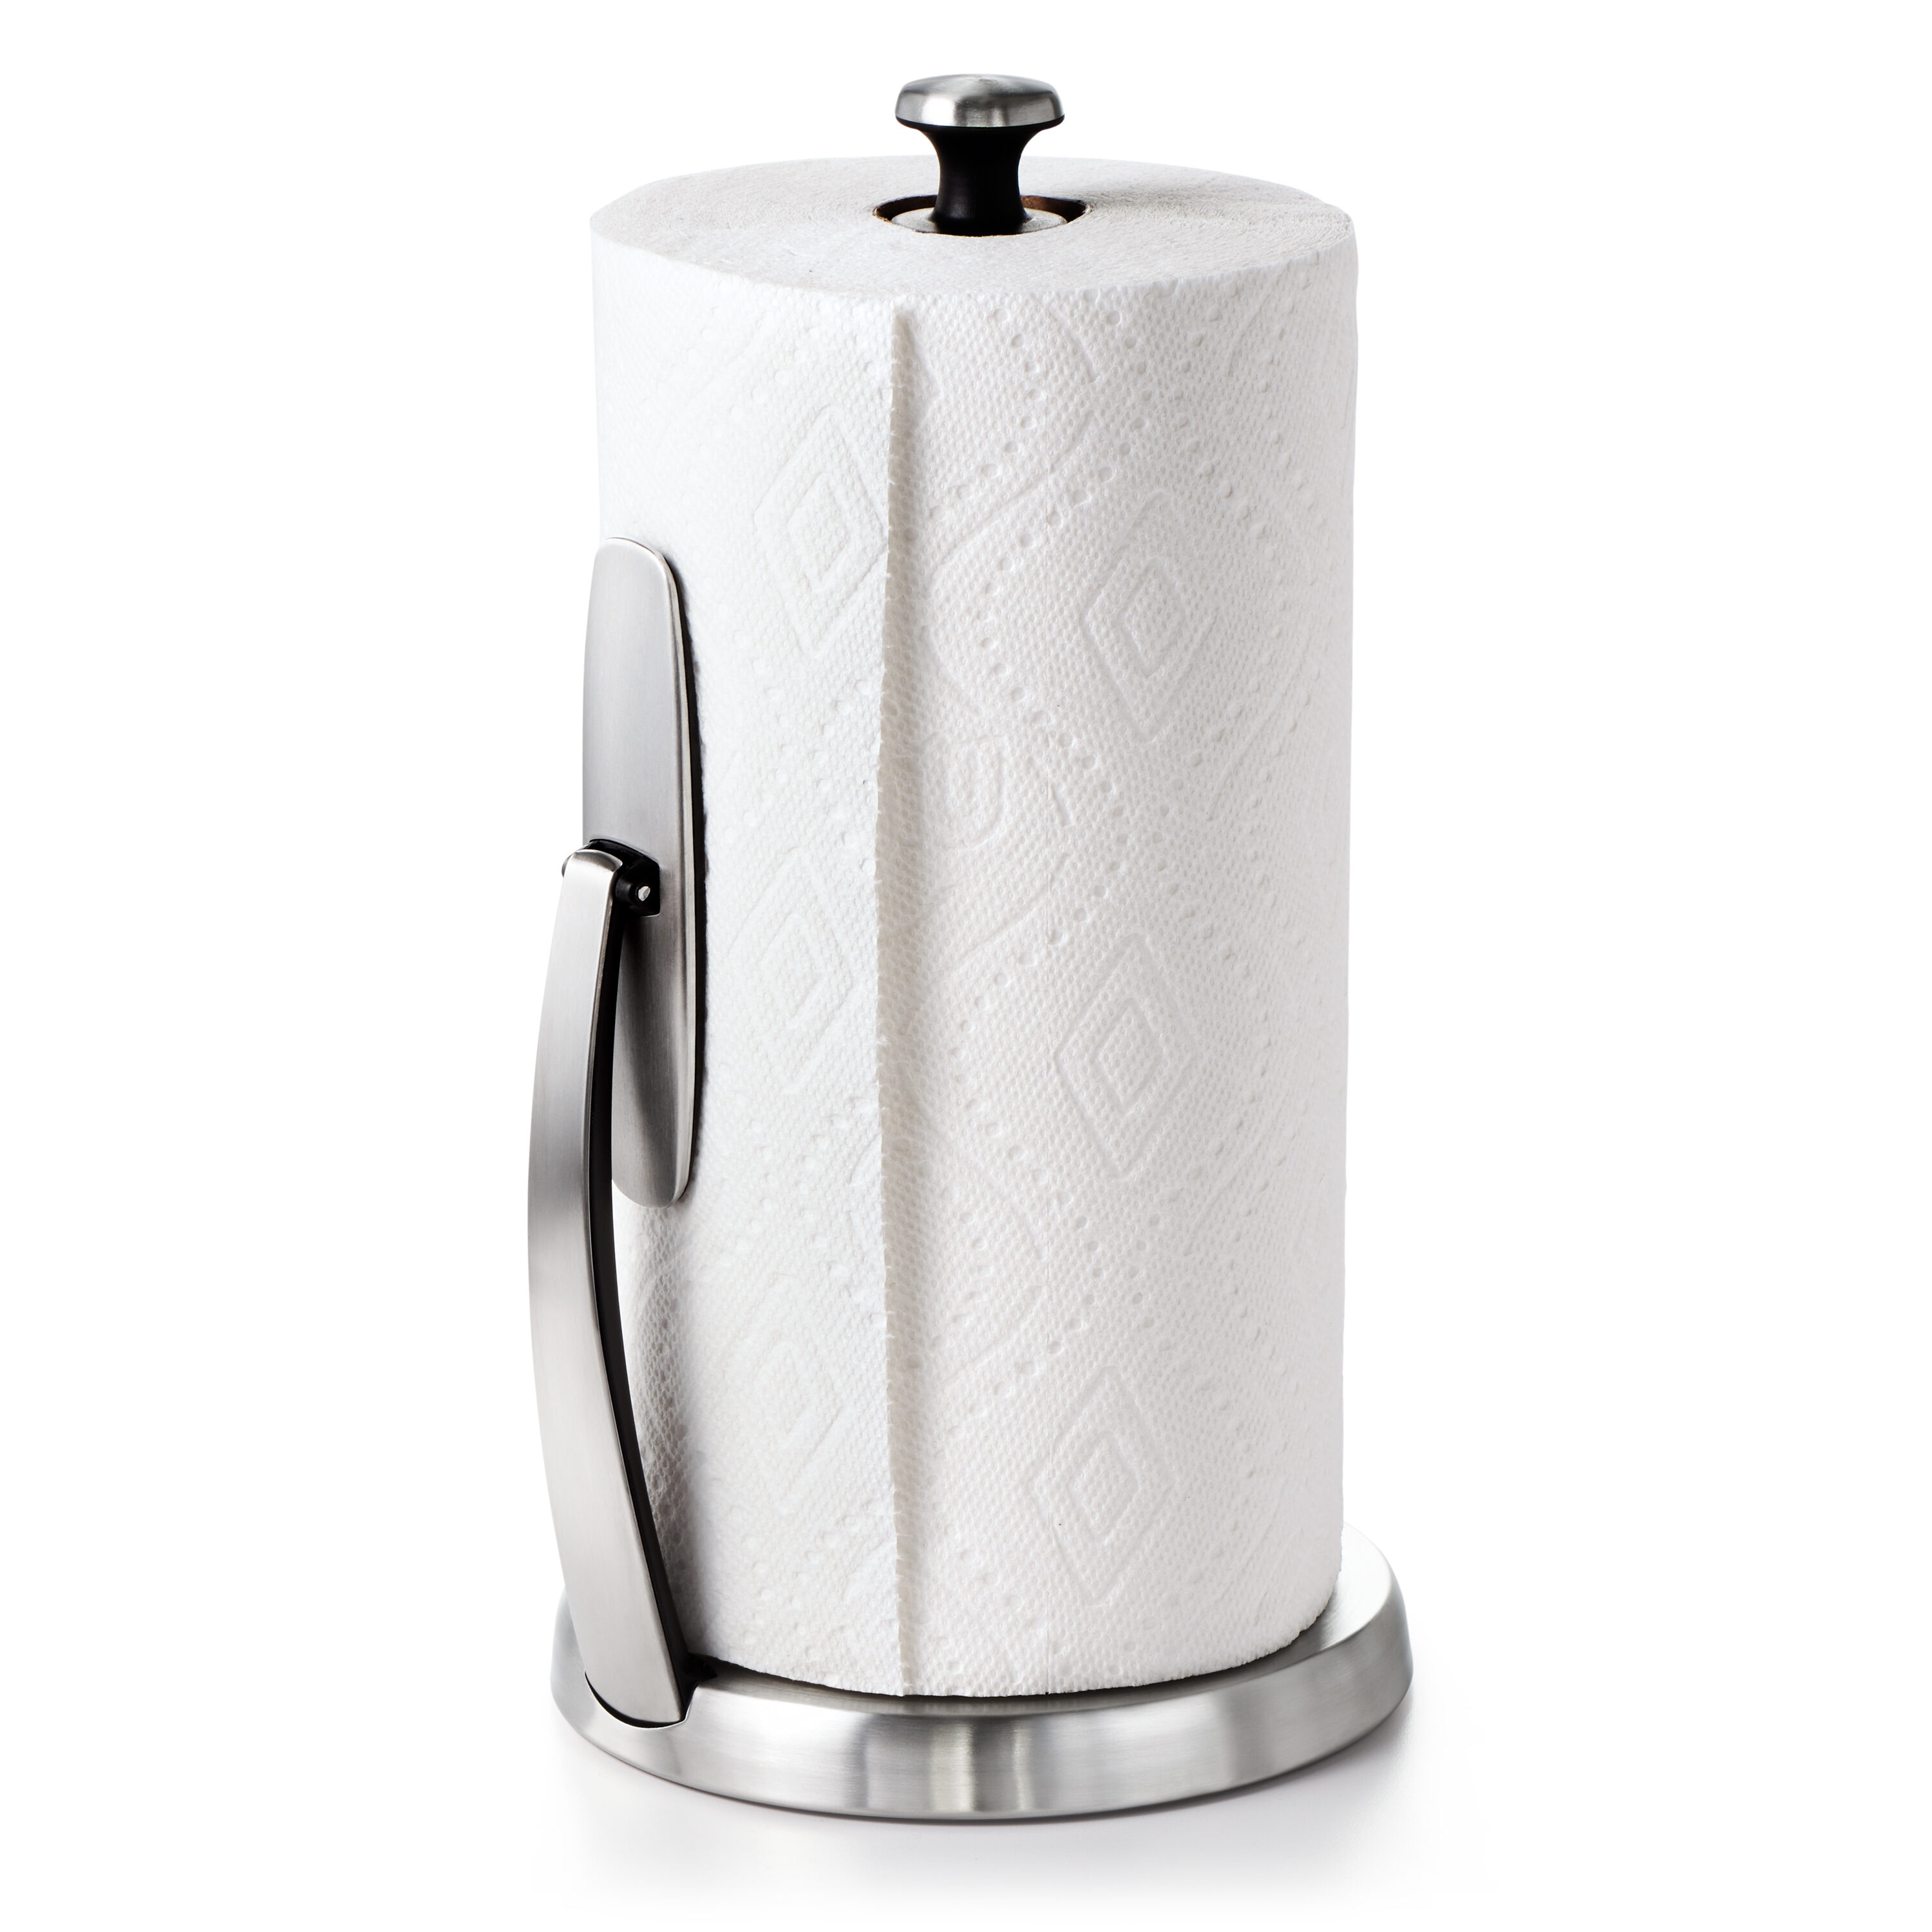 15 Best Paper Towel Holders and Dispensers 2018 - Unique Paper Towel Holders